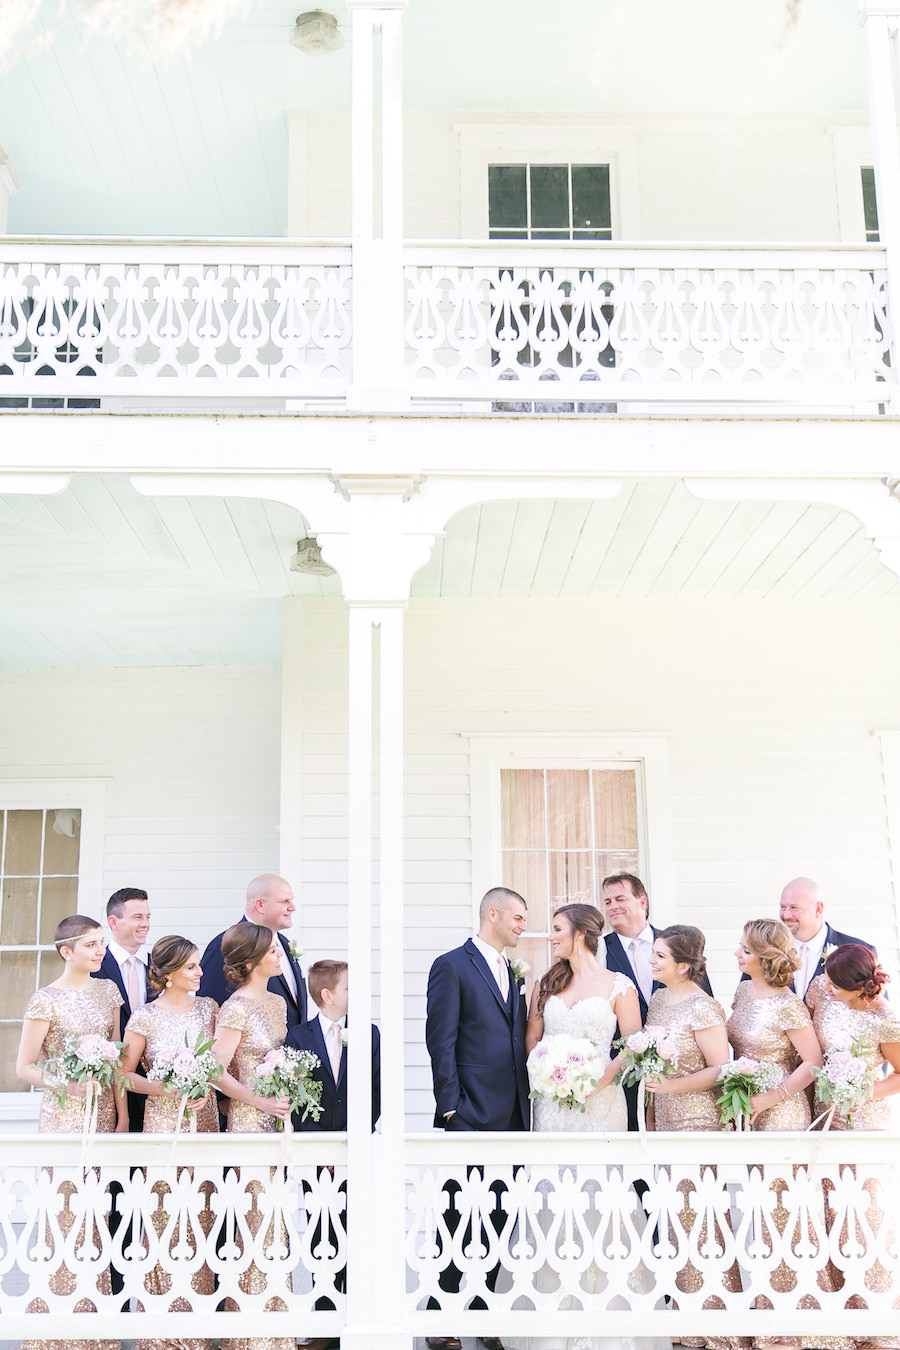 Outdoor Bridal Party Wedding Portrait at Historic Southern Home In Brooksville FL | Rose Gold Sequined Badgley Mischka Bridesmaid Dresses | White and Soft Pink Rose Bouquets | Brides by Demetrios Ivory Lace Wedding Gown